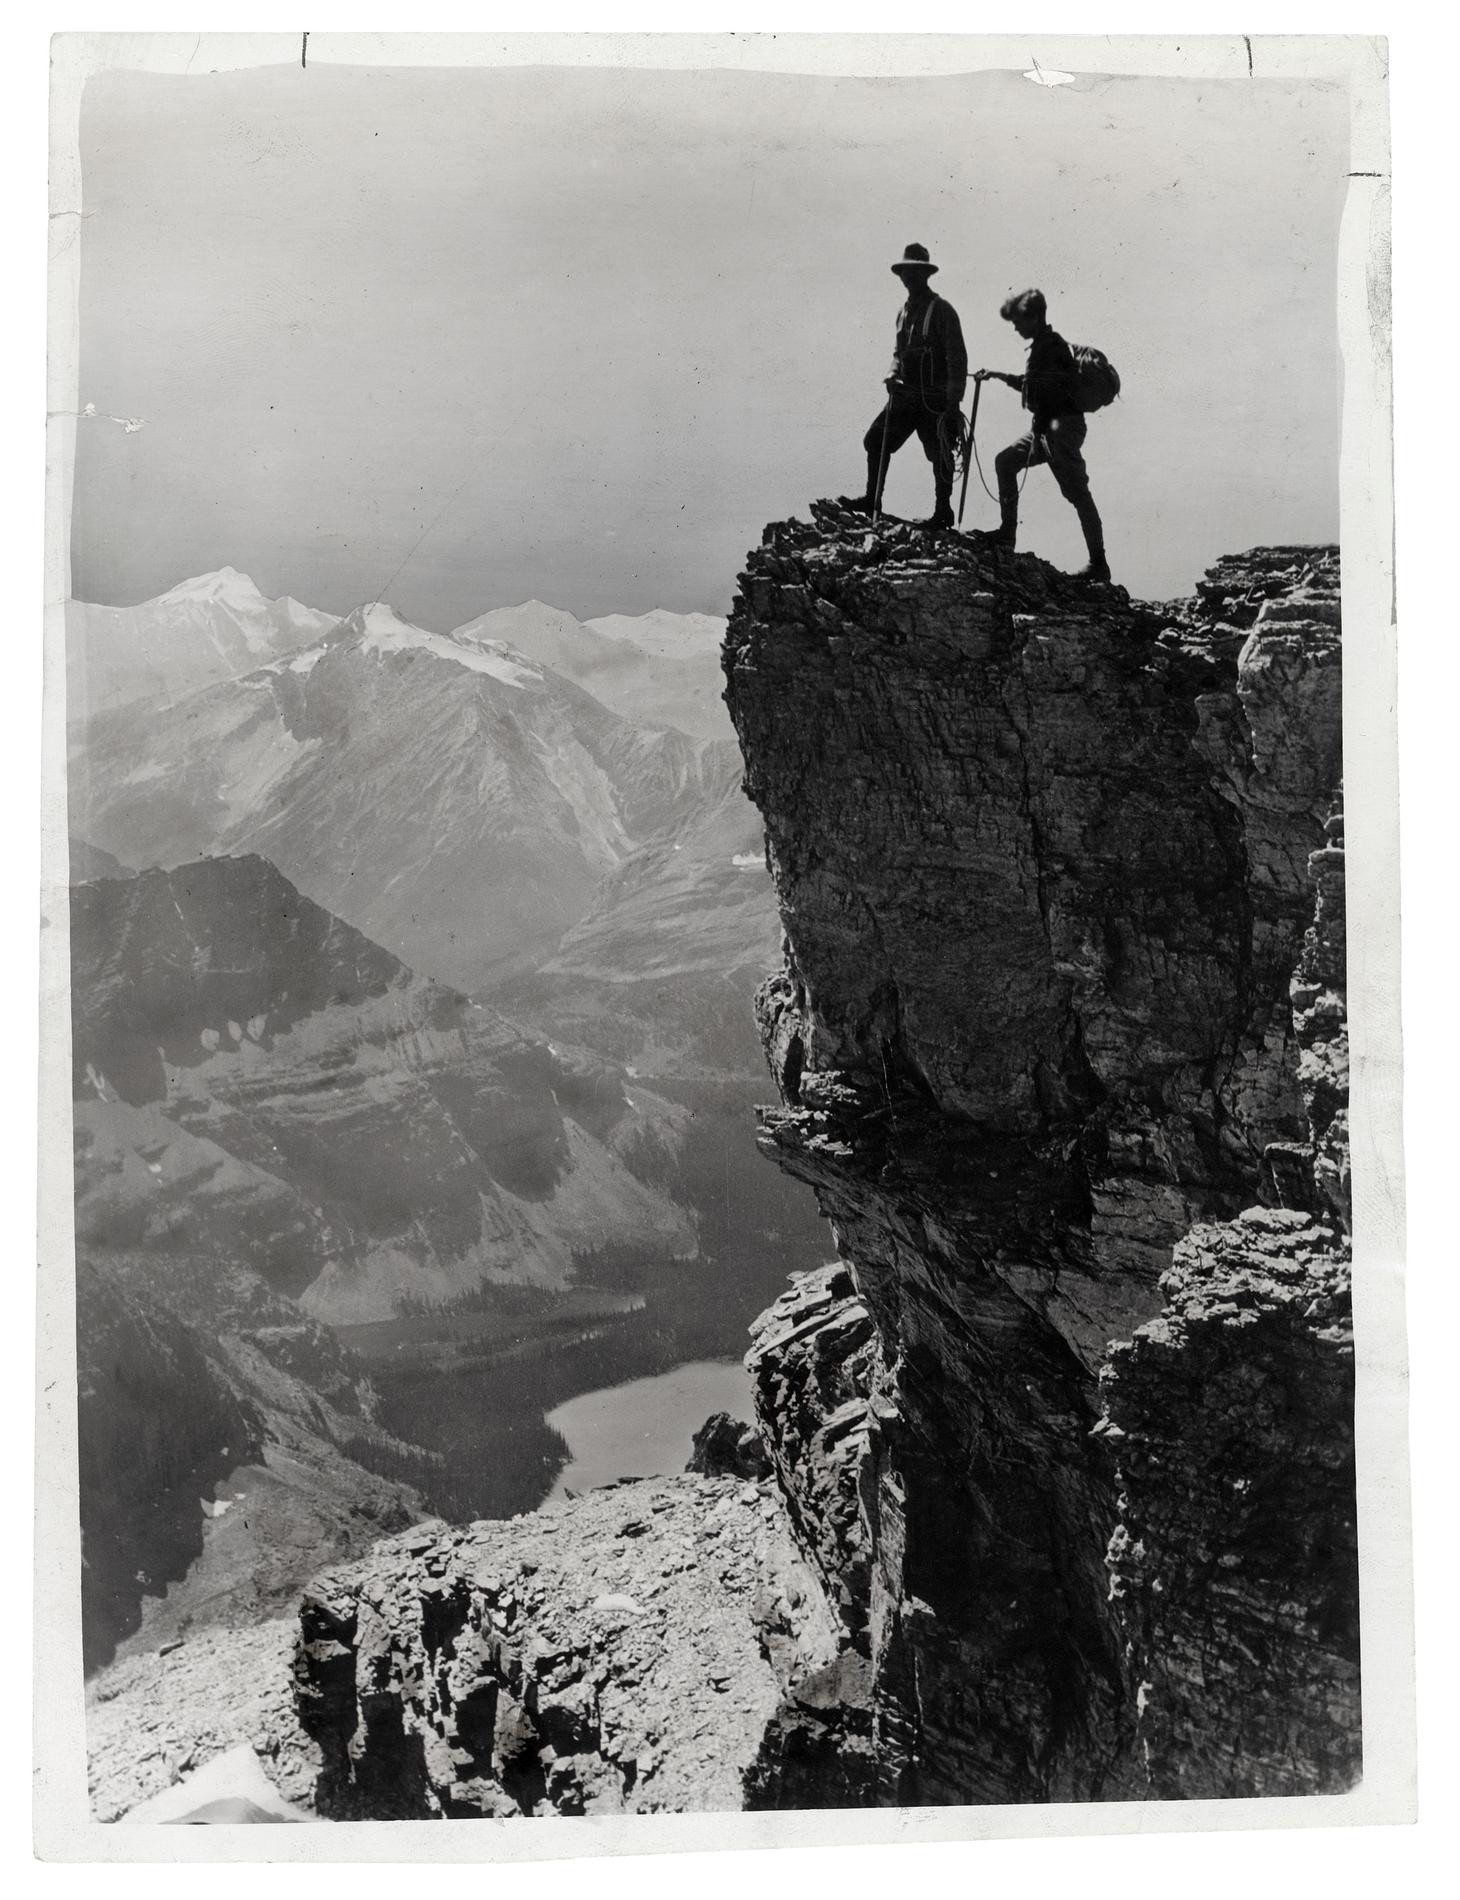 Miss Georgia Englehard scales her fifty-sixth peak in the Canadian Rockies with Ernest Feuz, her Swiss guide, Mount Victoria, British Columbia, Canada in 1933.